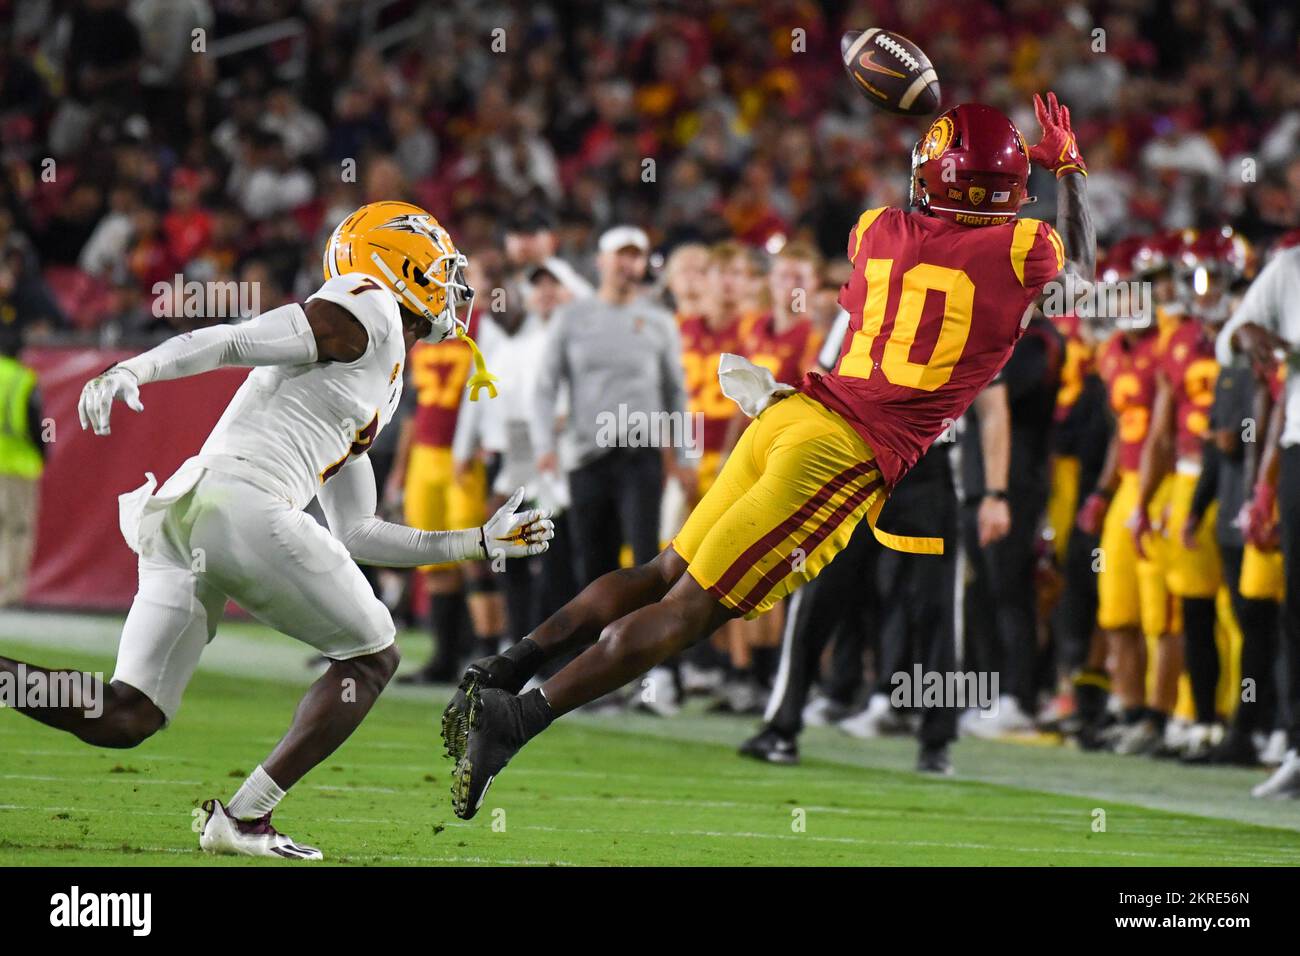 Southern California Trojans wide receiver Kyron Hudson (10) catches the ball during an NCAA football game against the Arizona State Sun Devils, Saturd Stock Photo